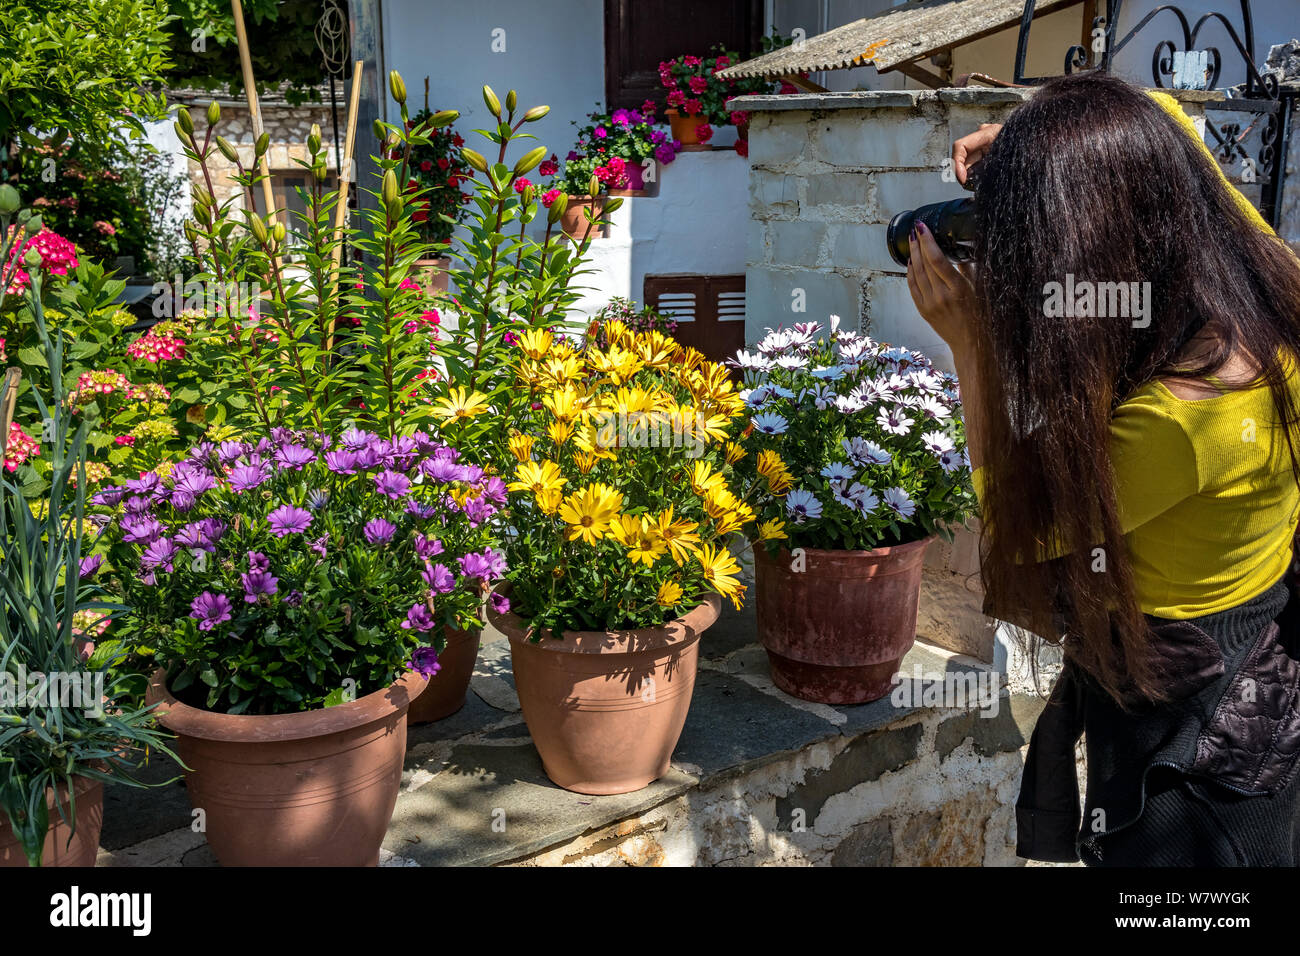 IOANNINA, GREECE - JUNE 6, 2019 - Young tall female photographer with long black hair and yellow blouse takes photos of beautiful amazing spring bloss Stock Photo